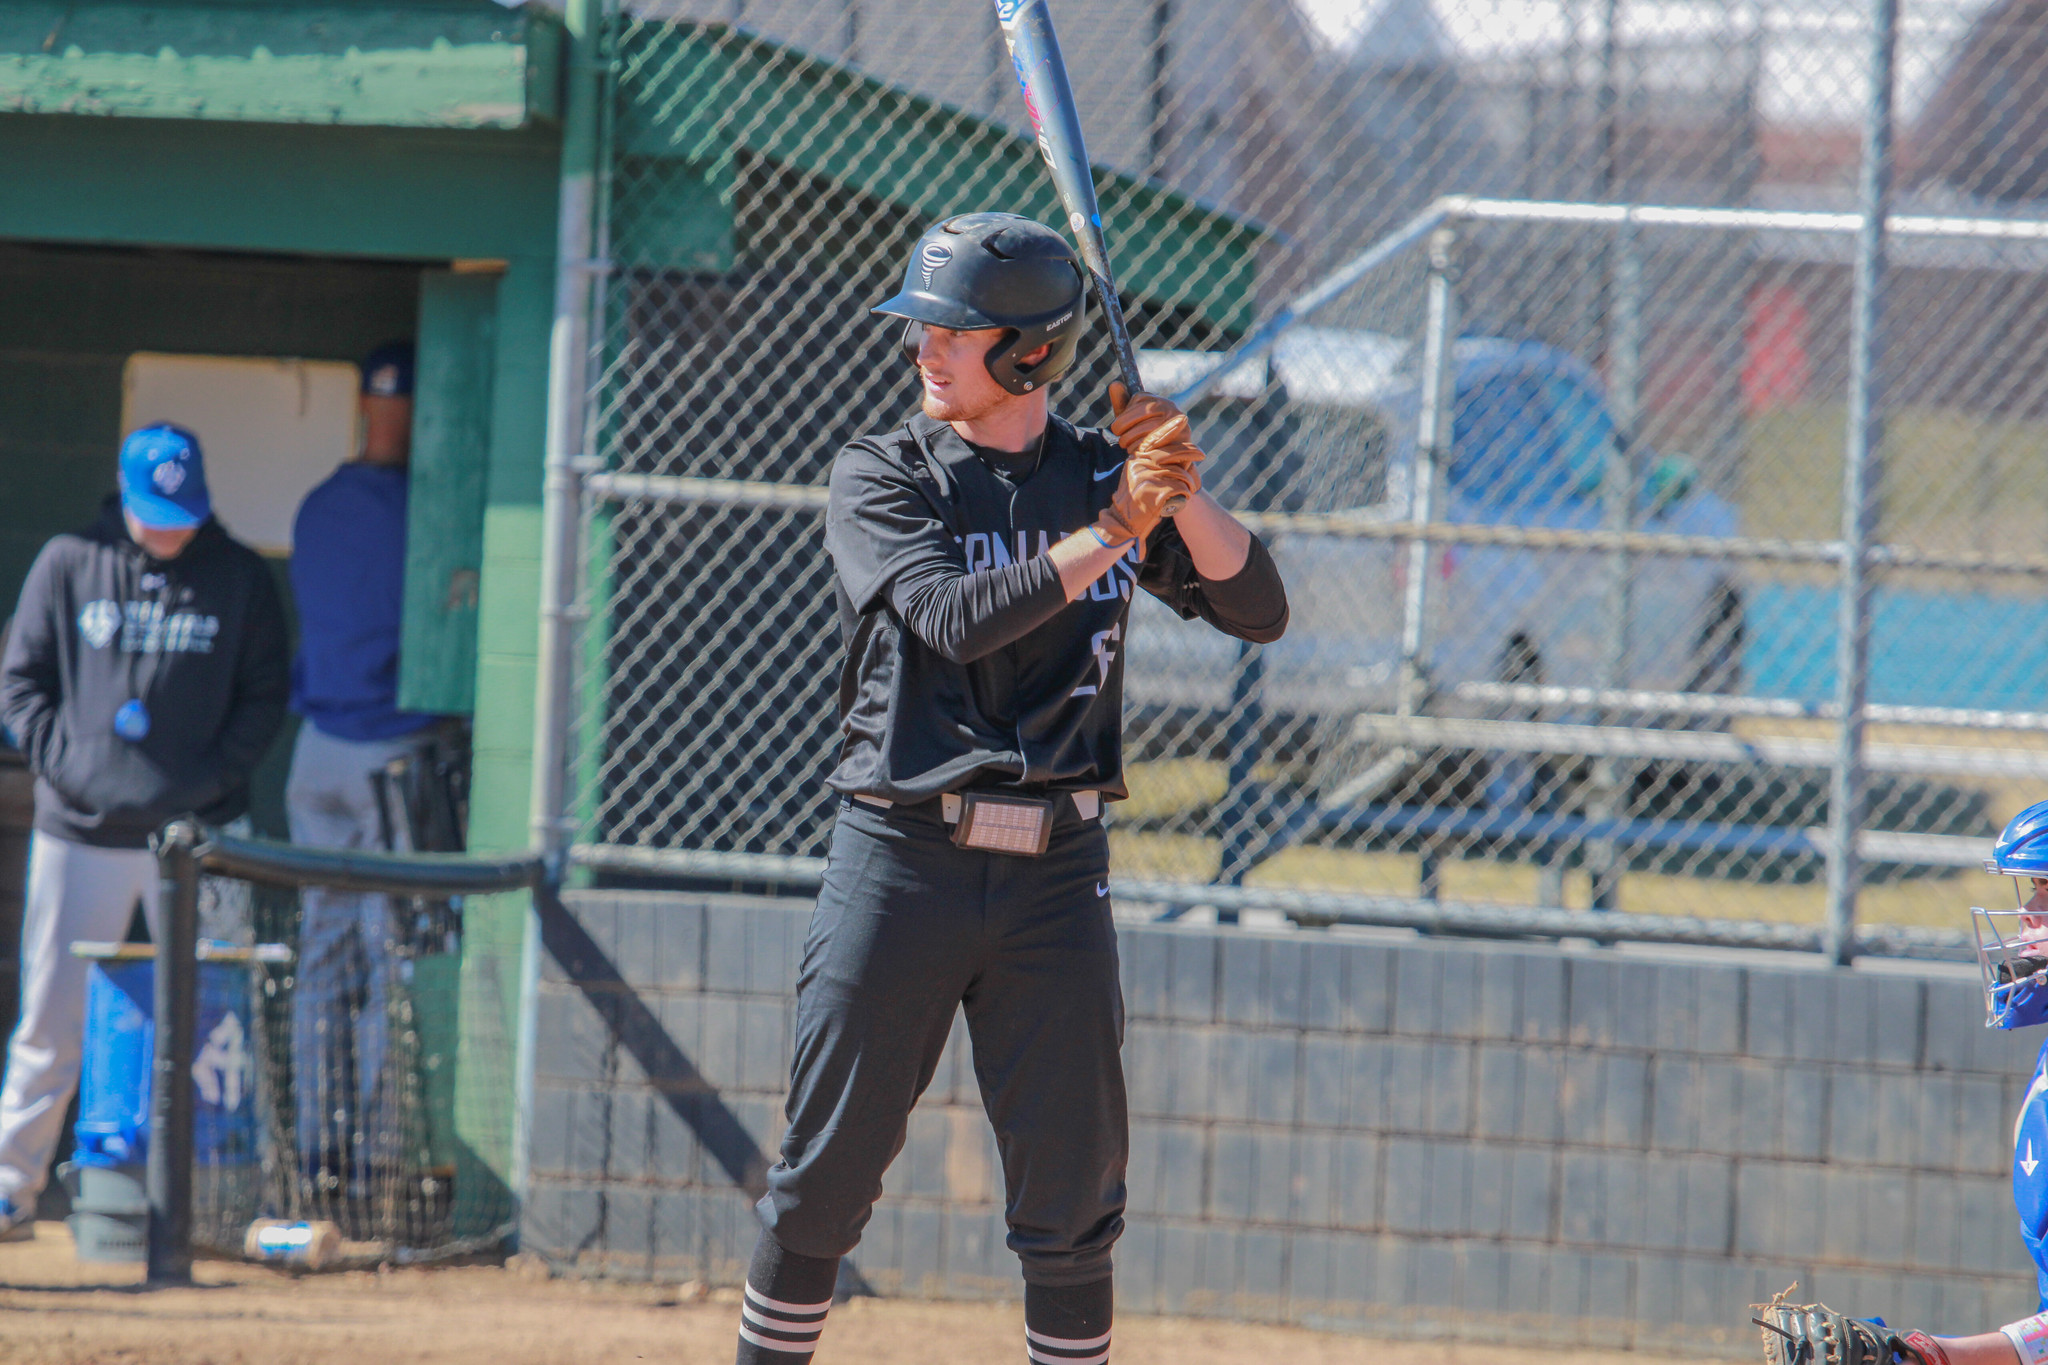 Cale Oehler registered a pair of home runs - including a grand slam - with six RBIs in a 12-11 loss to Piedmont (Photo courtesy of Damon Hewitt '23)